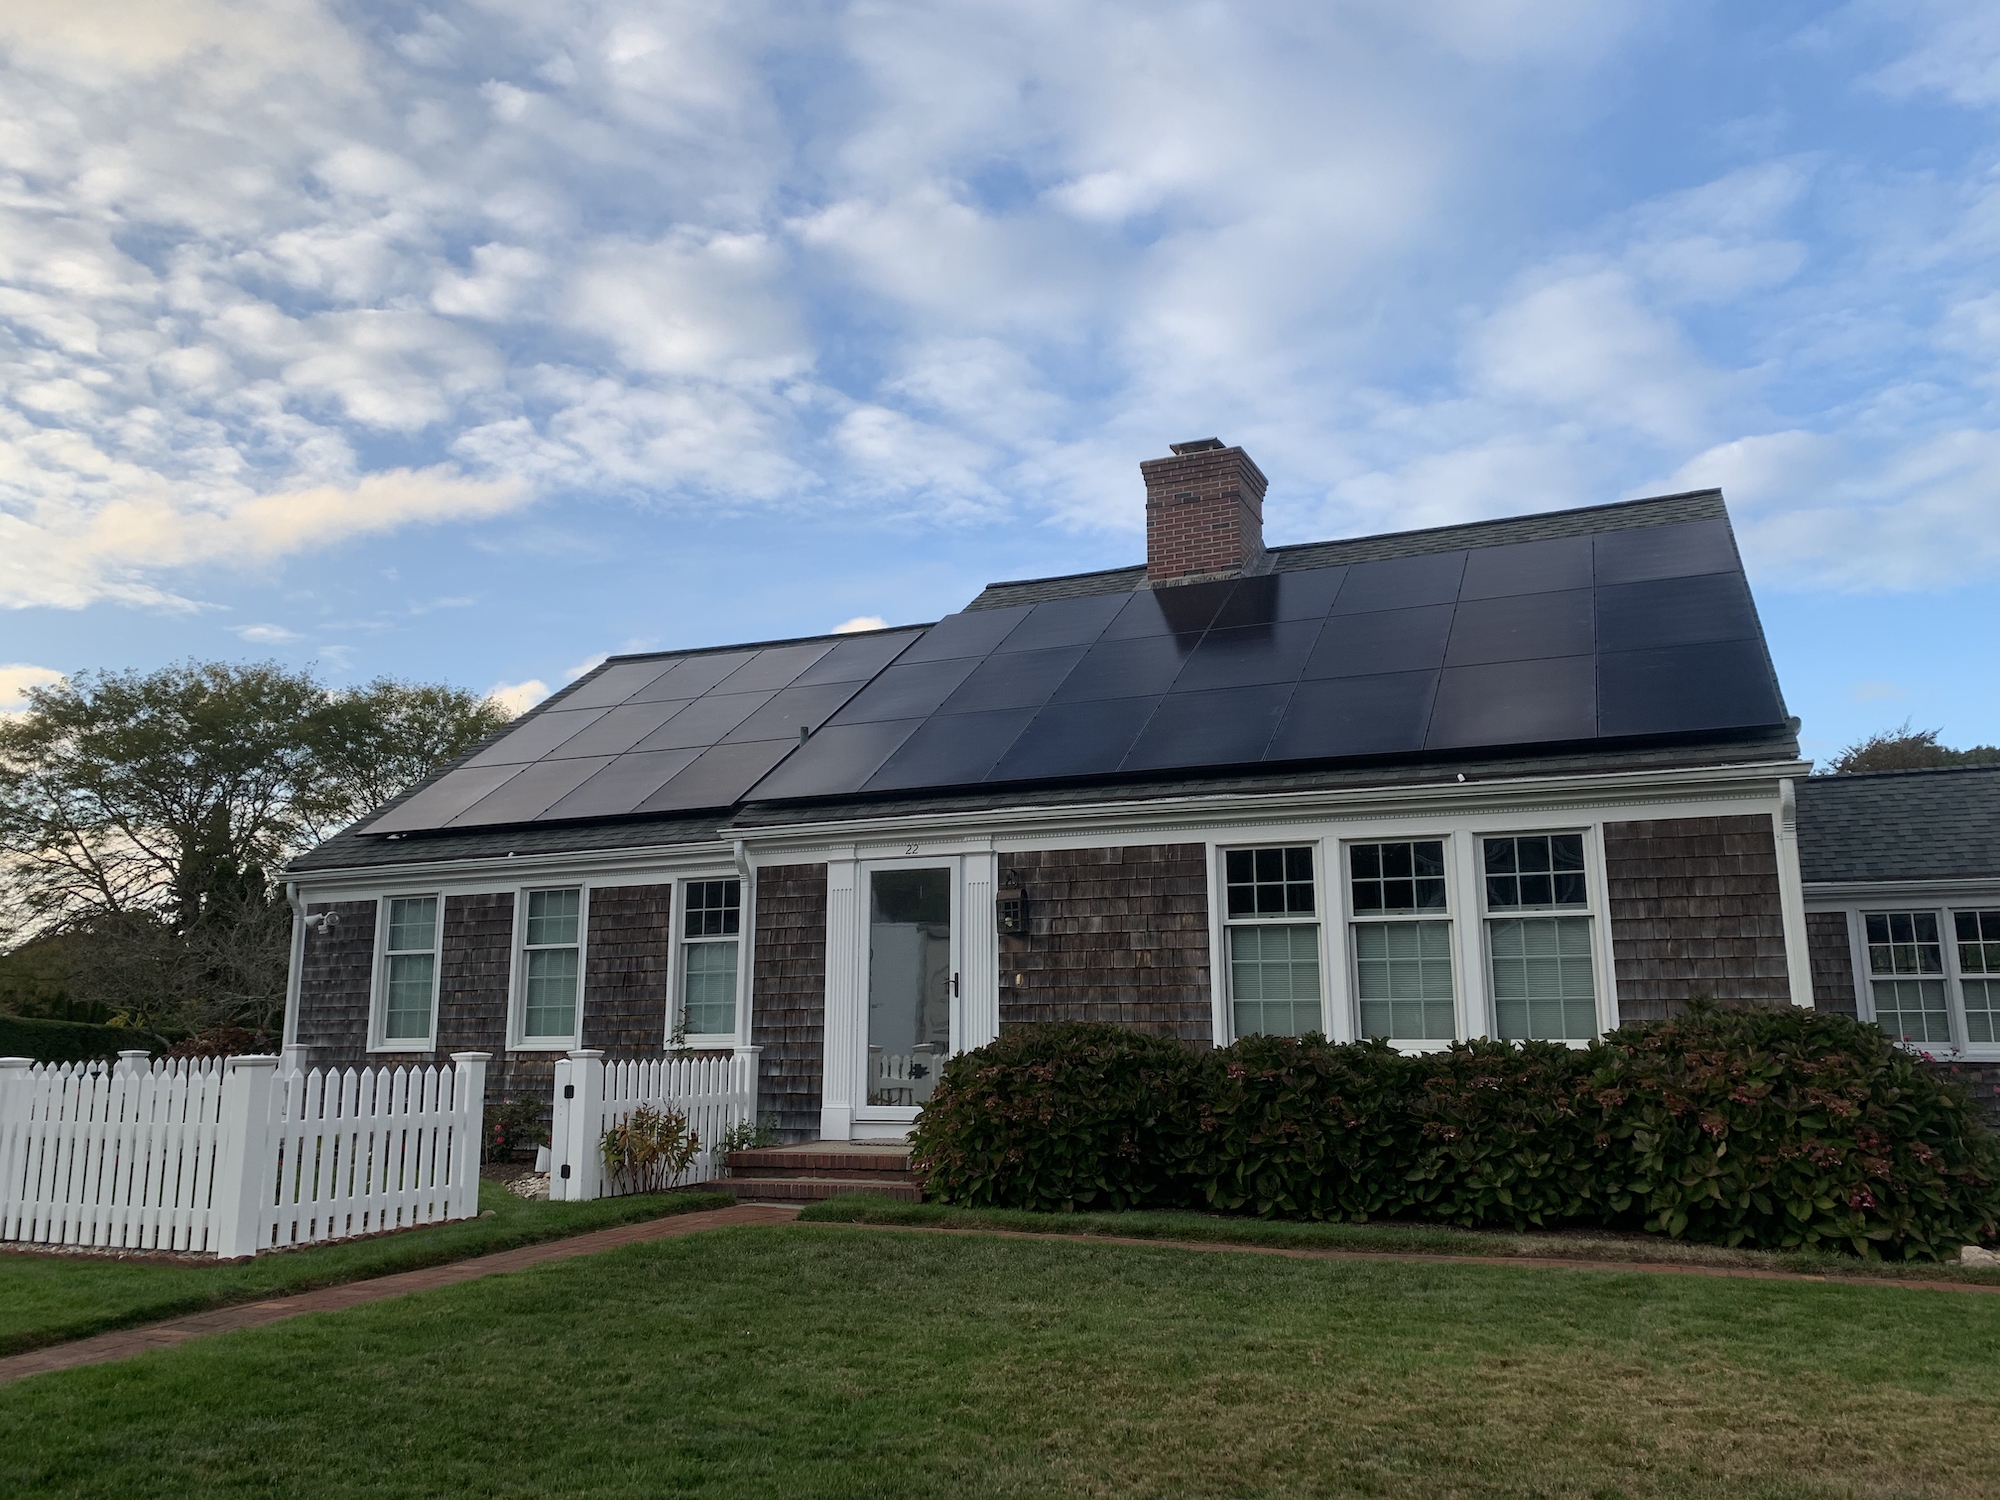 Cape Cod style home with solar panels covering the roof